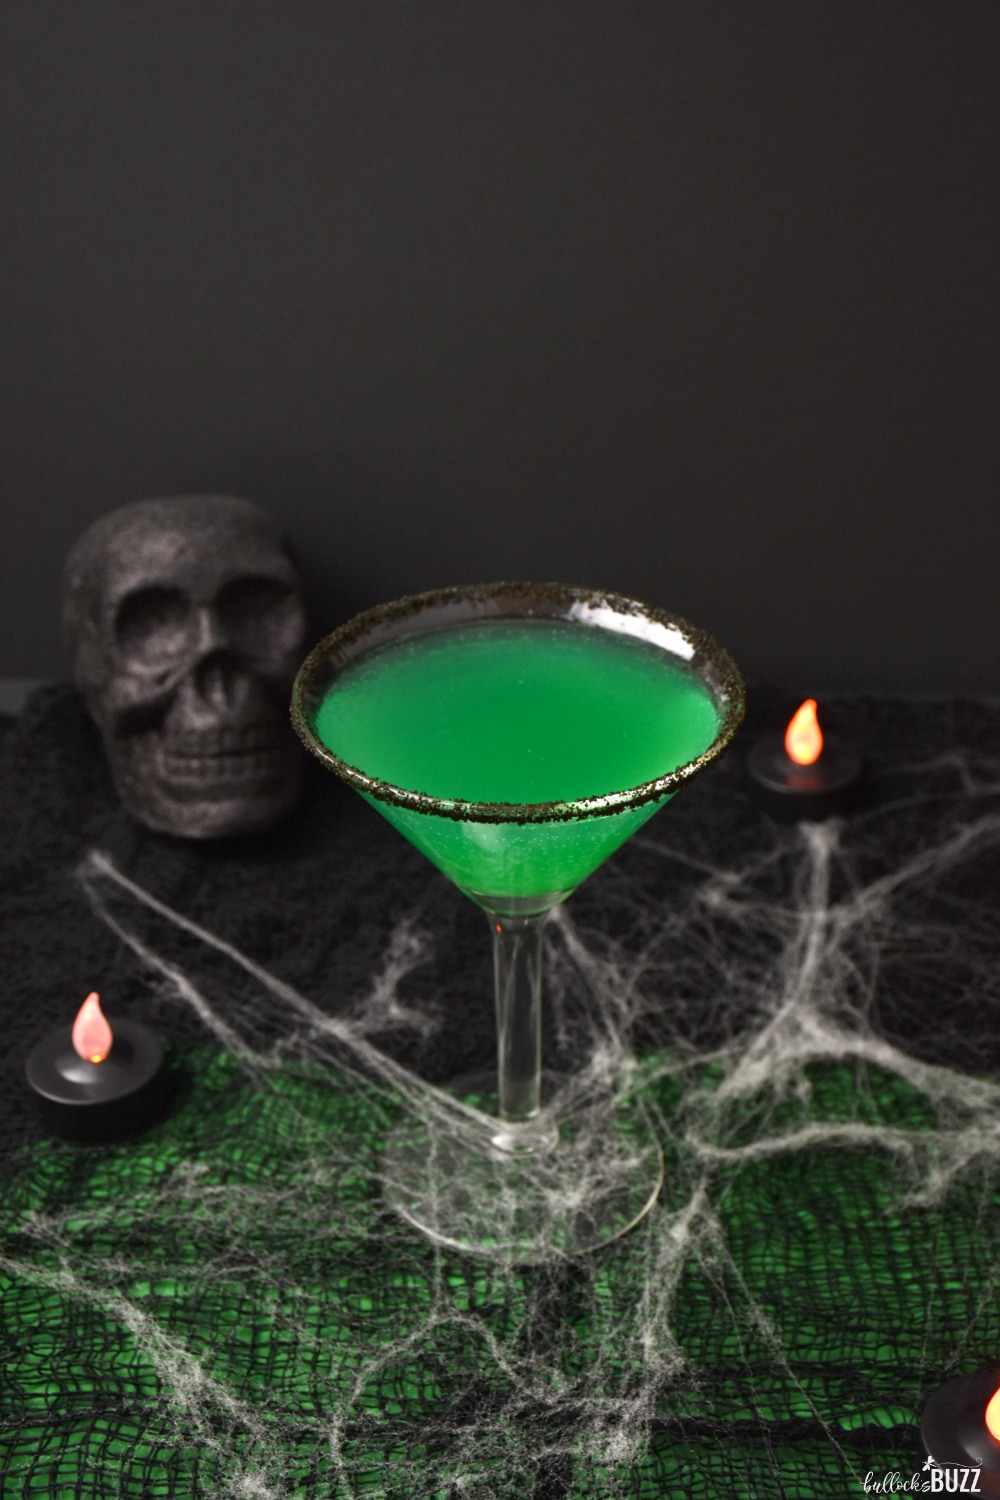 Scare up some adult fun on Halloween with this frightfully fruity Green Goblin Halloween Cocktail recipe! Get the recipe on the Bullock's Buzz blog!